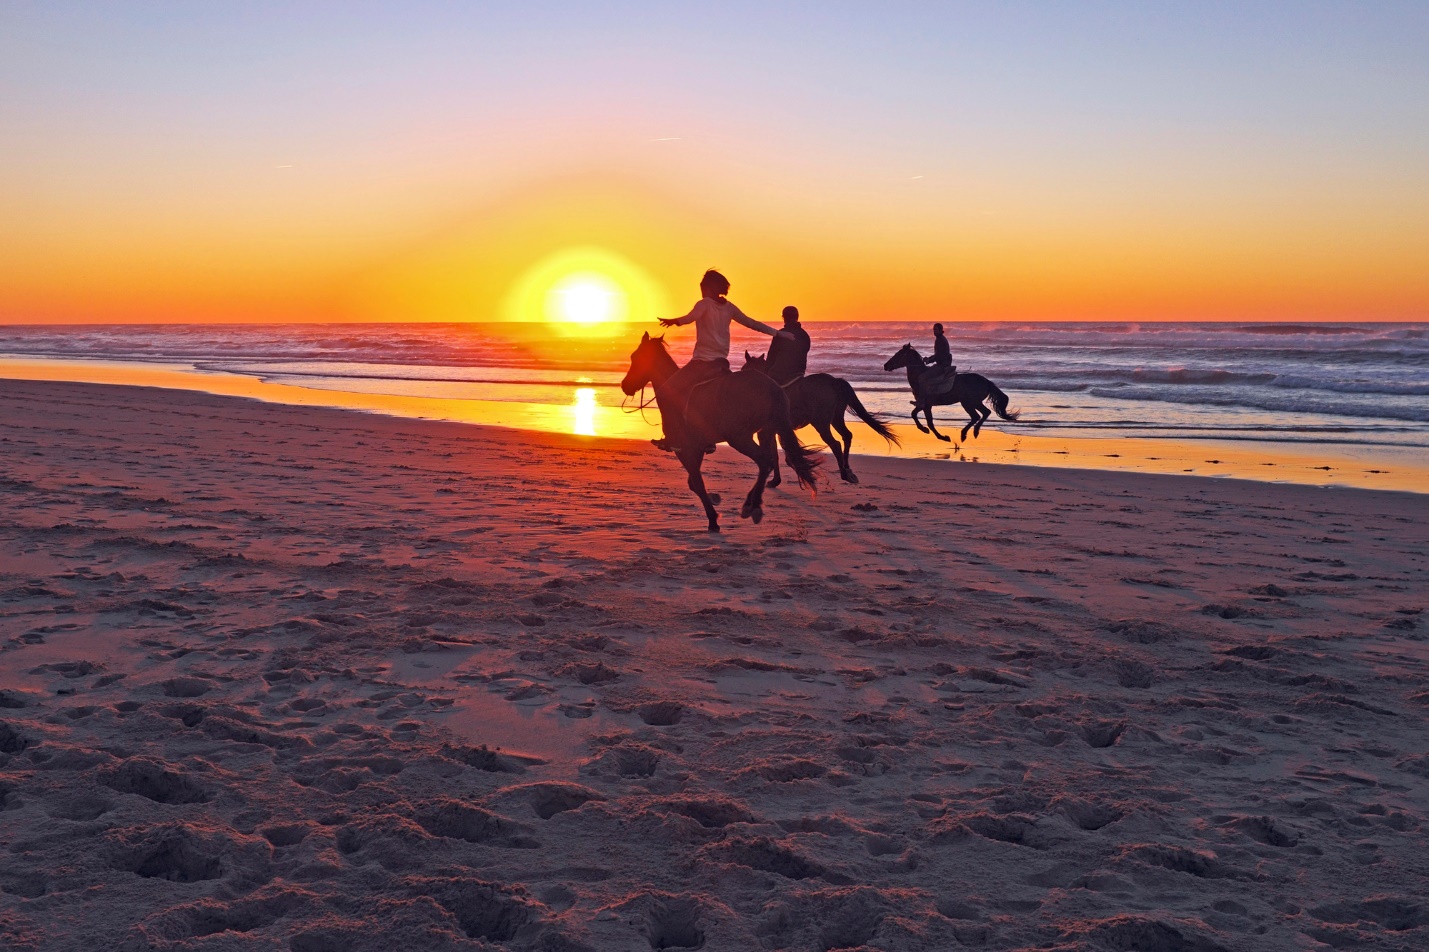 People riding horses on a beach

Description automatically generated